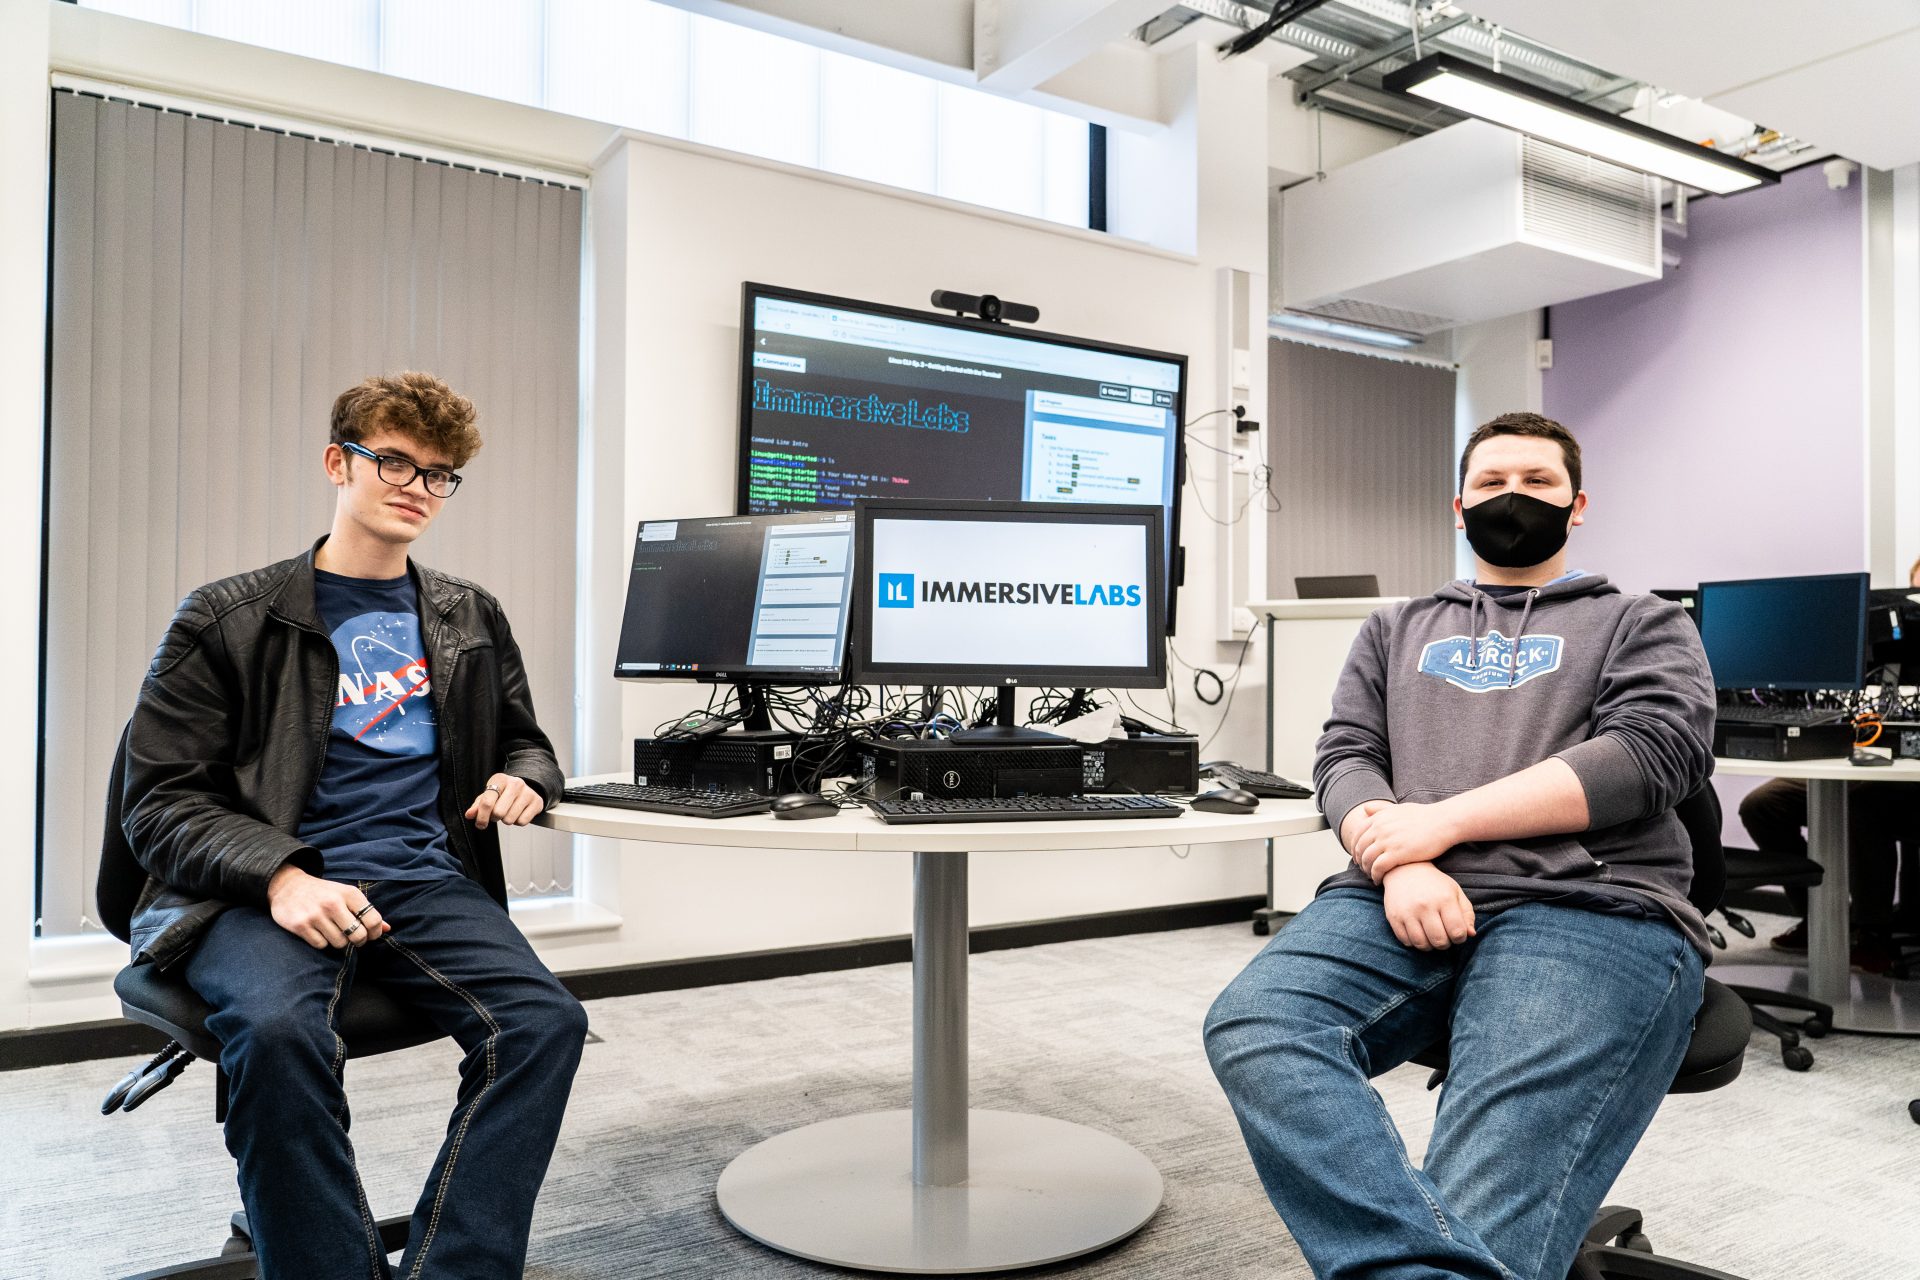 Students Eddie Meanley (left) and Connor Rosindale (right) find these cyber security workshops valuable